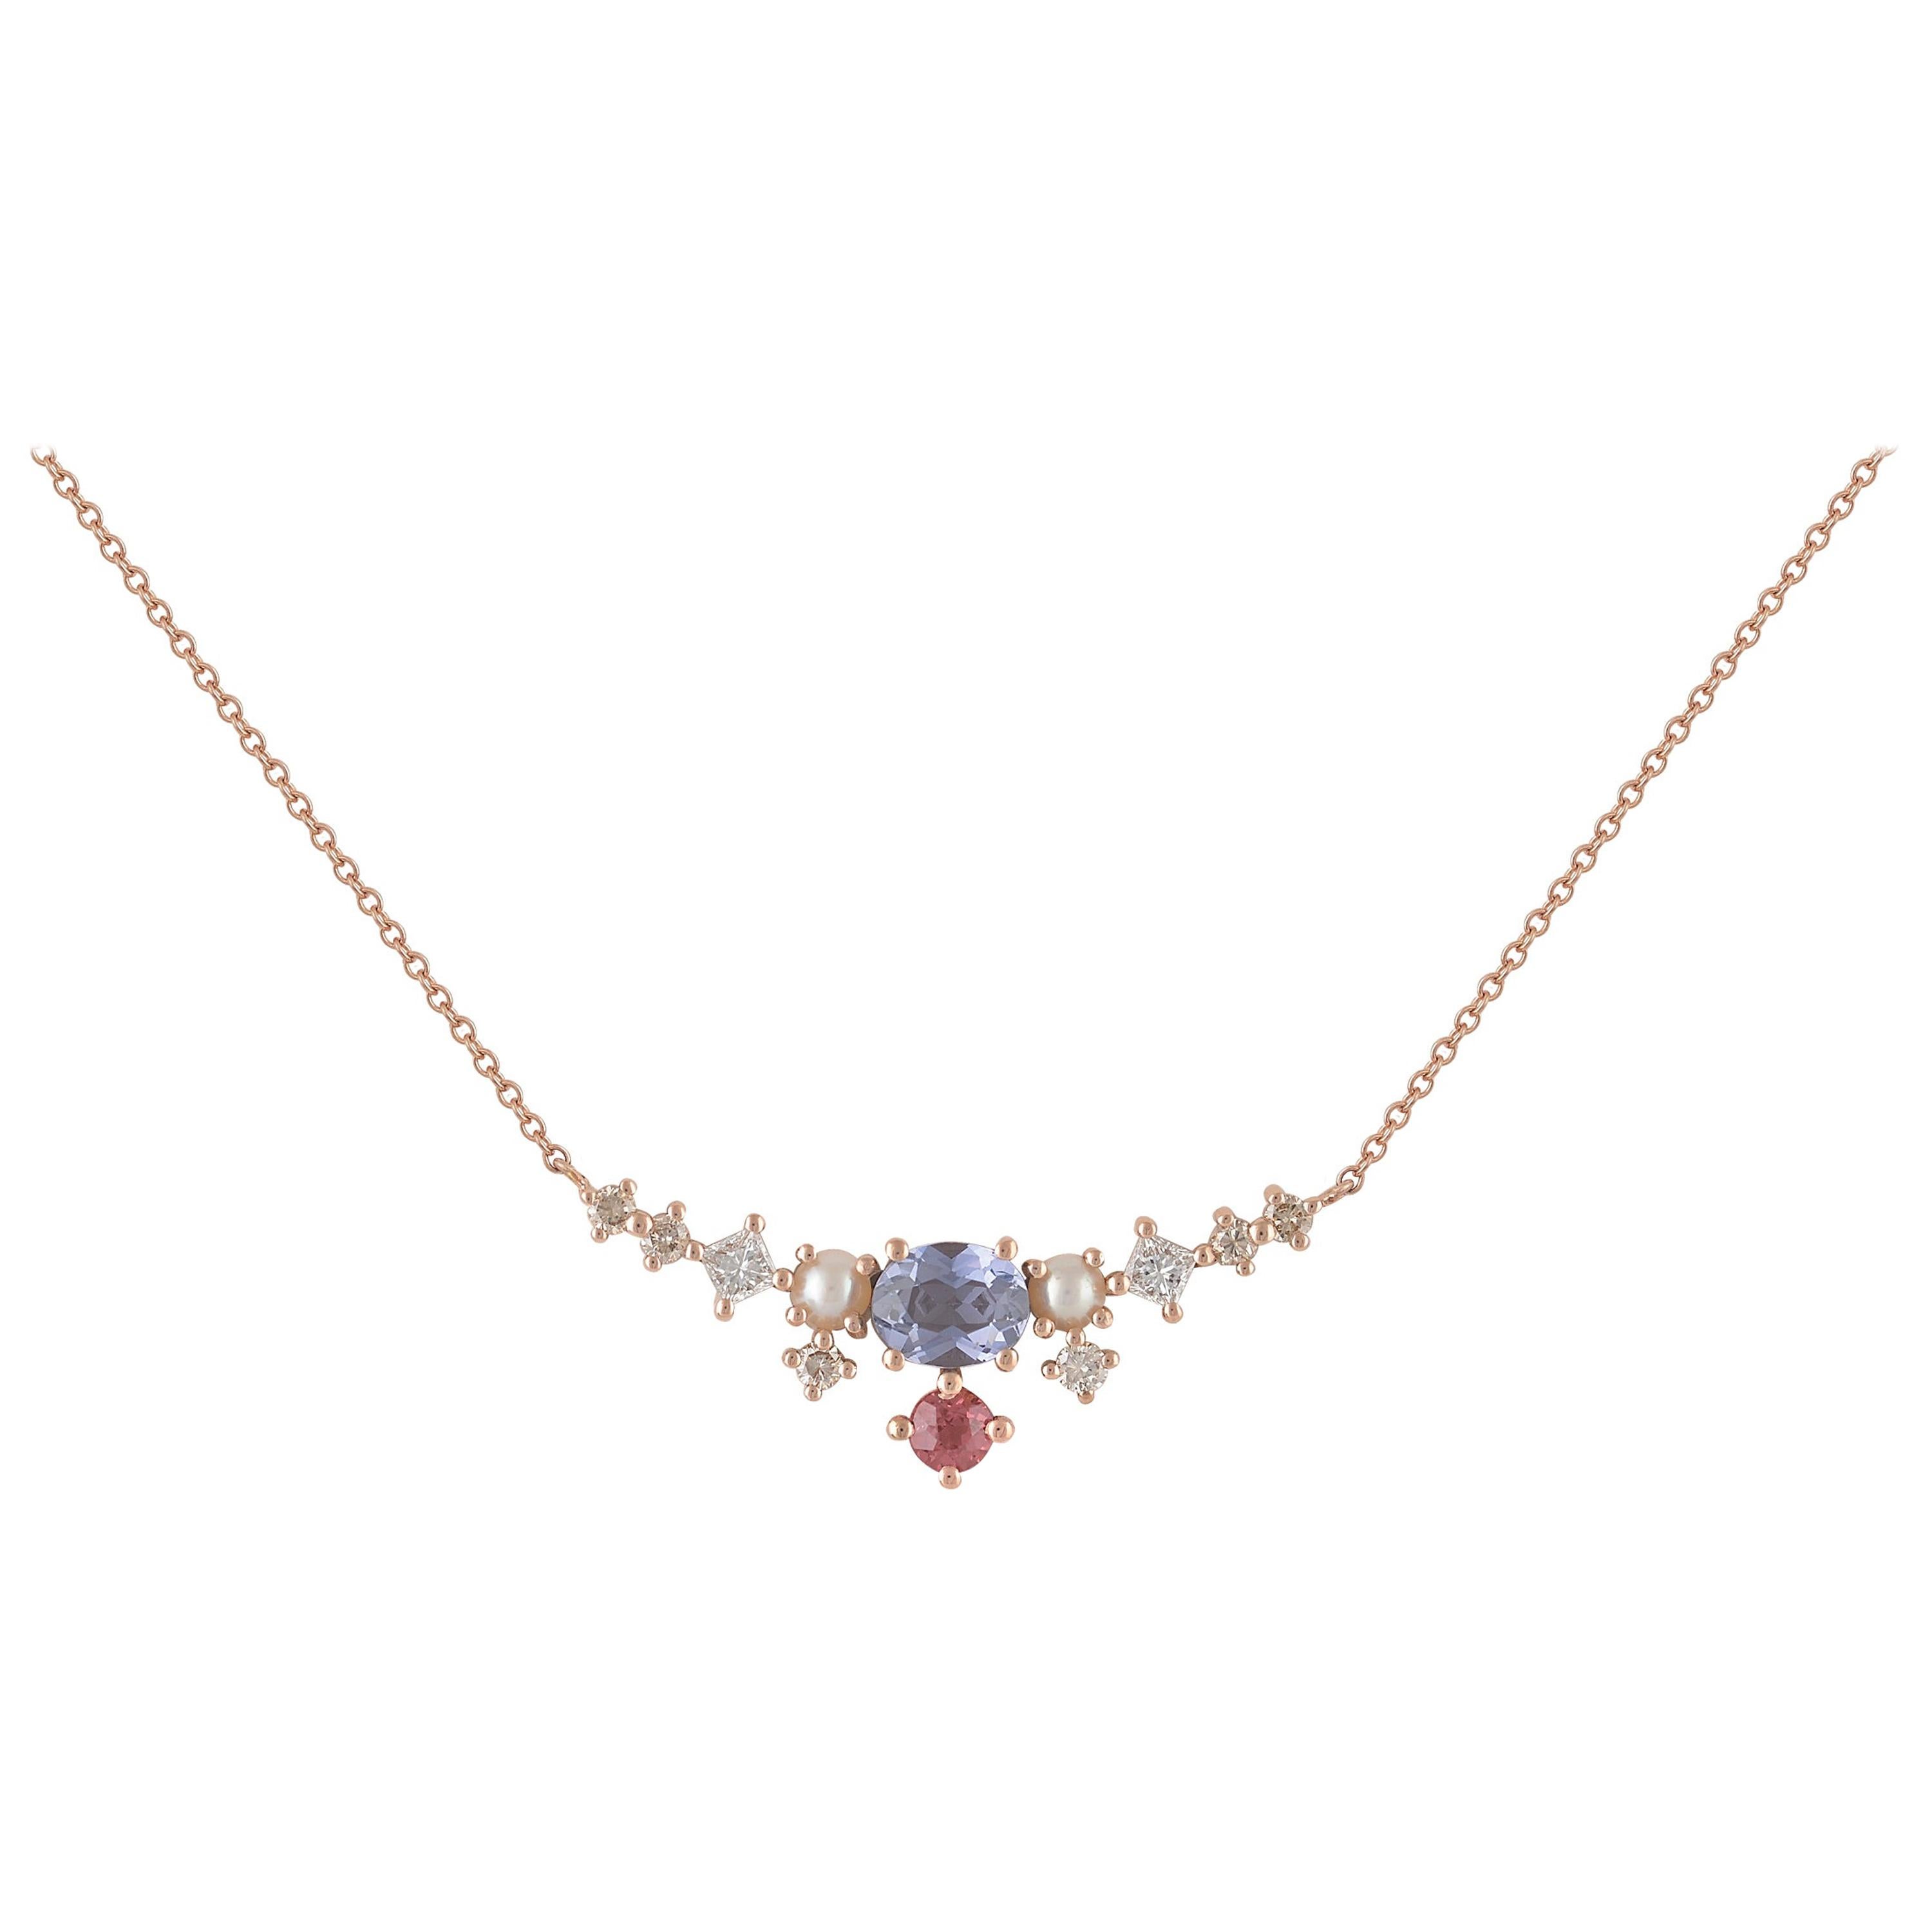 Colorful Multi-Stone 18 Karat Gold Necklace with Spinel, Garnet, Diamonds, Pearl